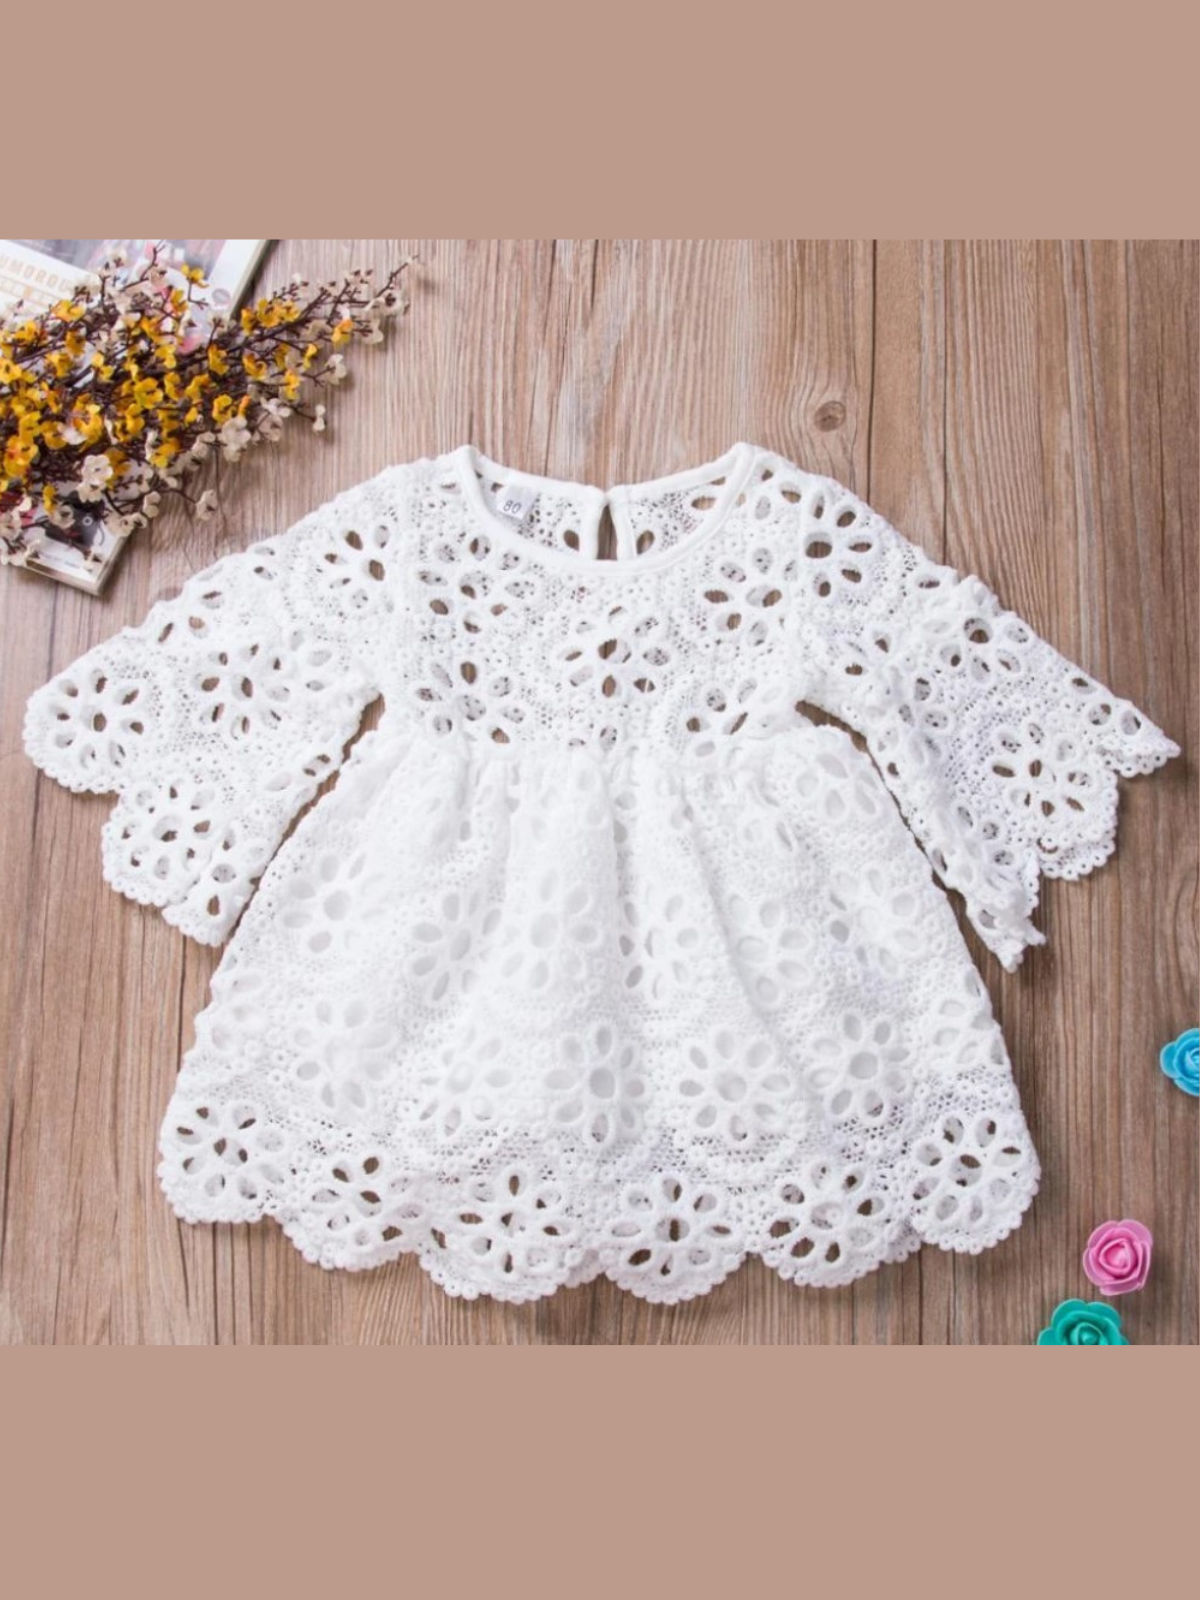 Mommy & Me | Matching Dresses | Mid Sleeve Eyelet Floral Lace Dress